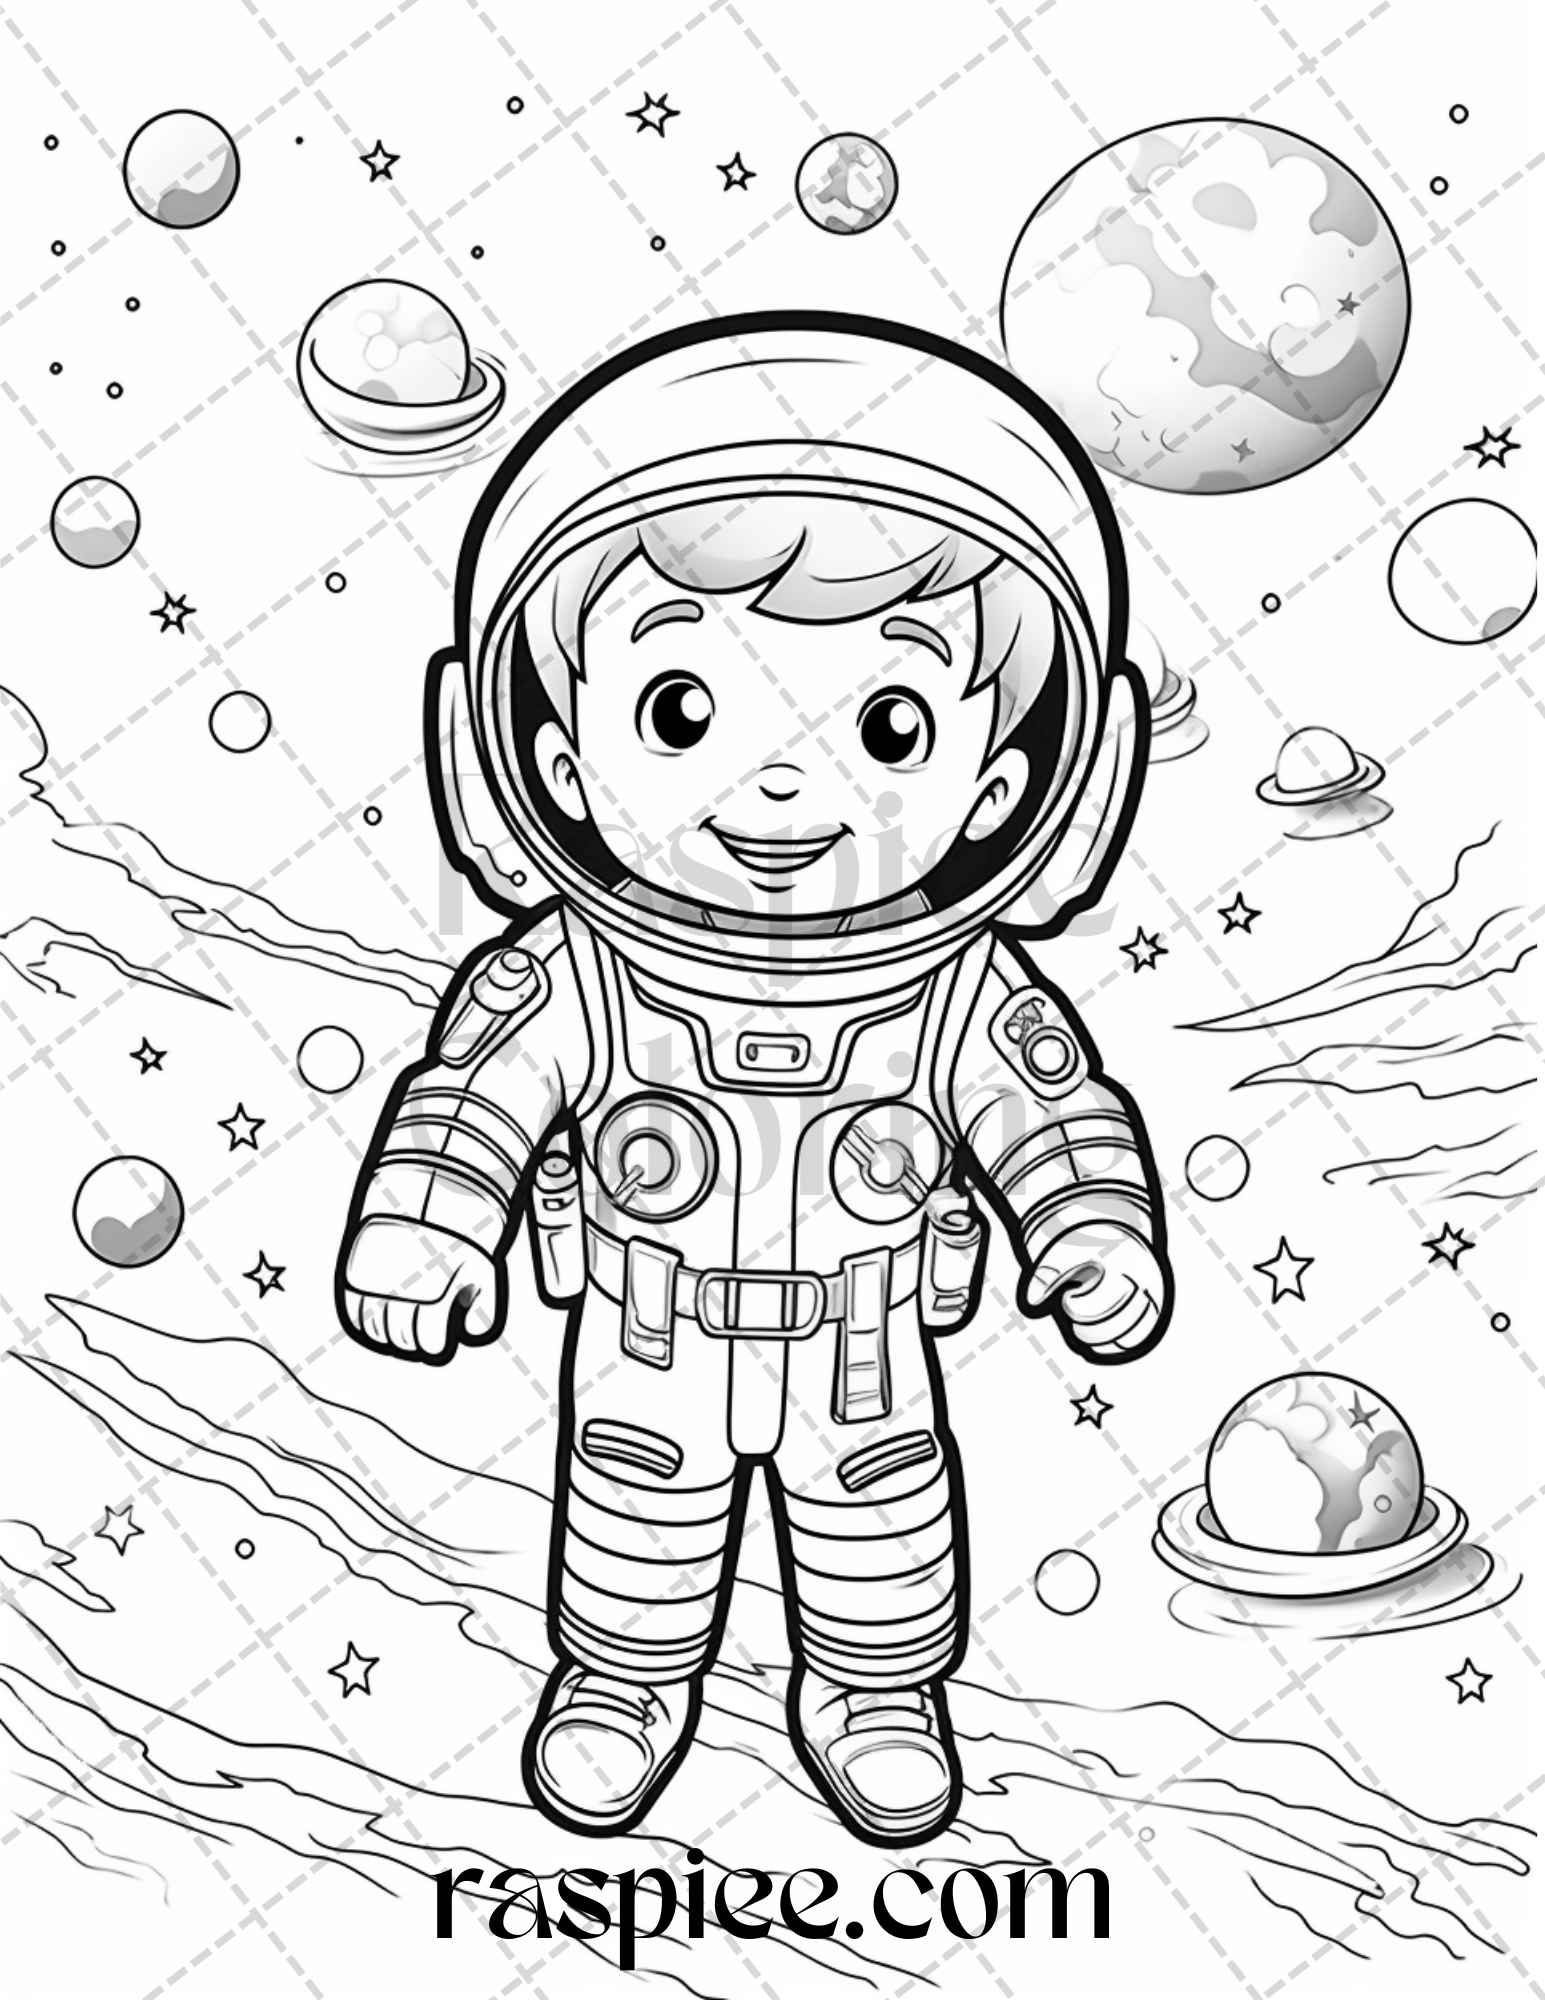 Kids Coloring Paper Roll 30cmX300cm Perfect Travel Activity Astronaut Planet, Other